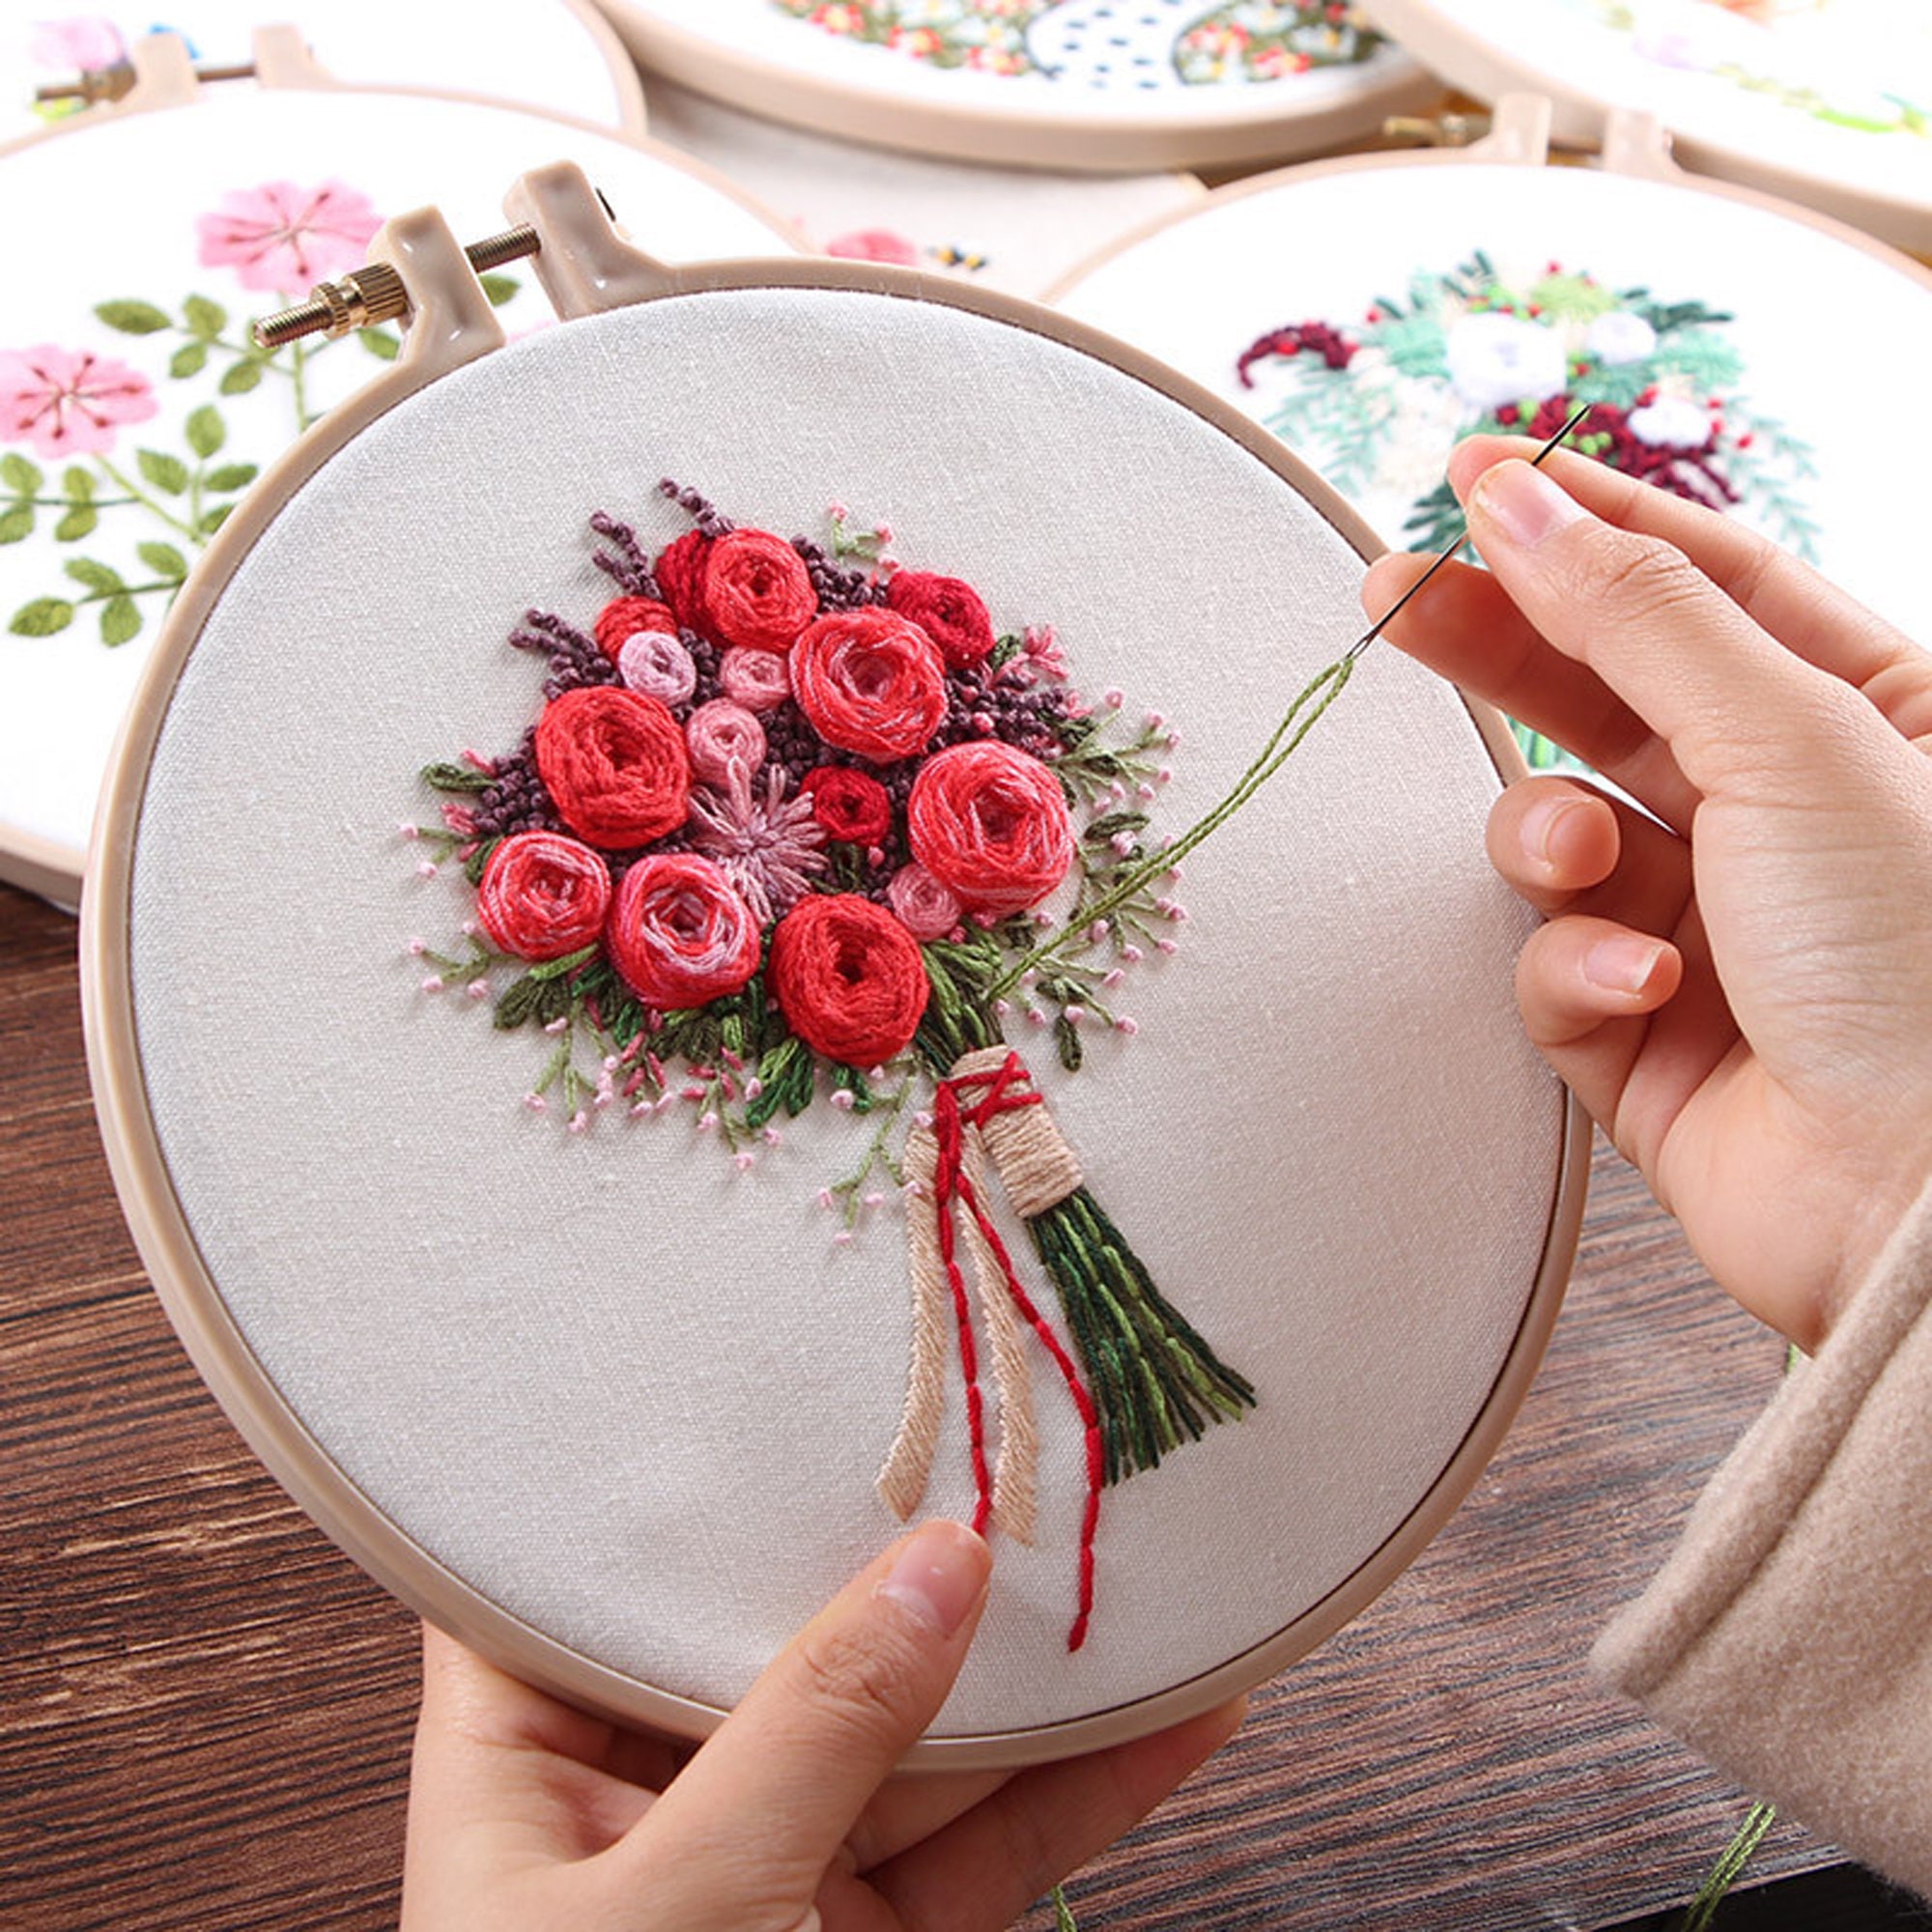 ARTIFICAY Embroidery kit for Beginners with Embroidery Patterns